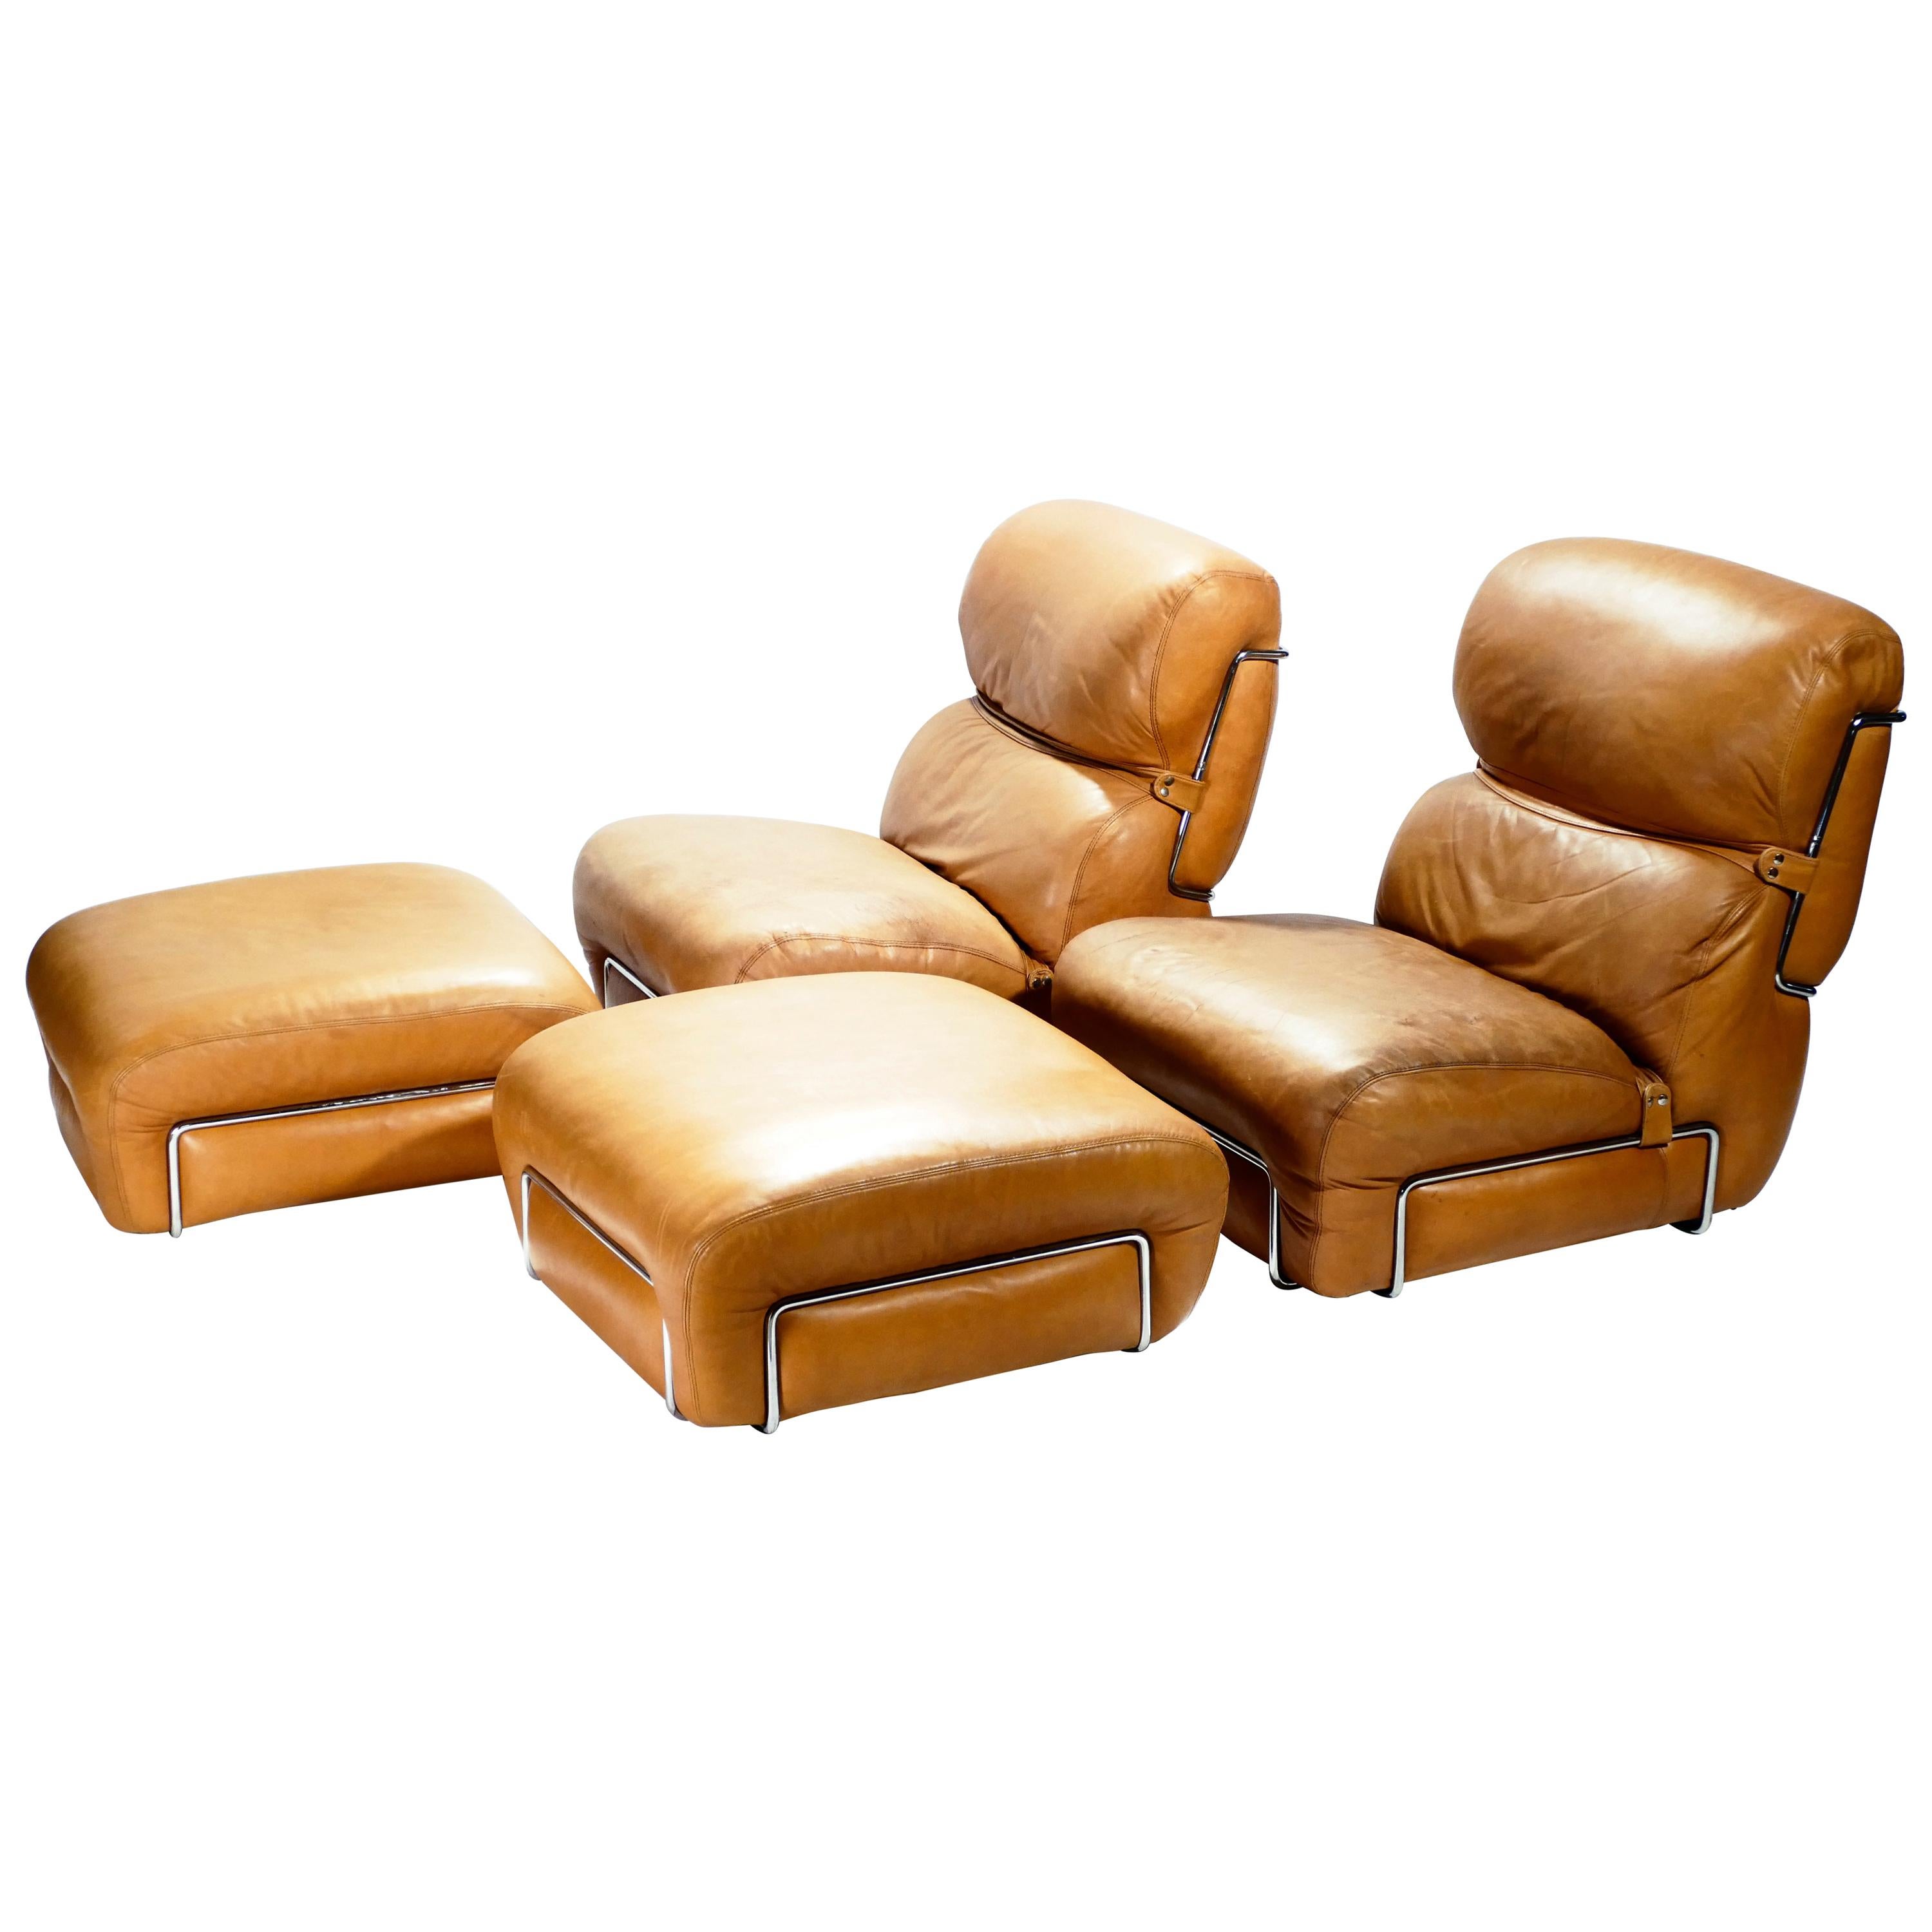 Beautiful patina shows the vintage status of this pair of Italian leather armchairs with matching leather ottomans designed by Gianfranco Frattini during the 1970s. A chrome structure holds the cushions, its shine contrasting brightly against the